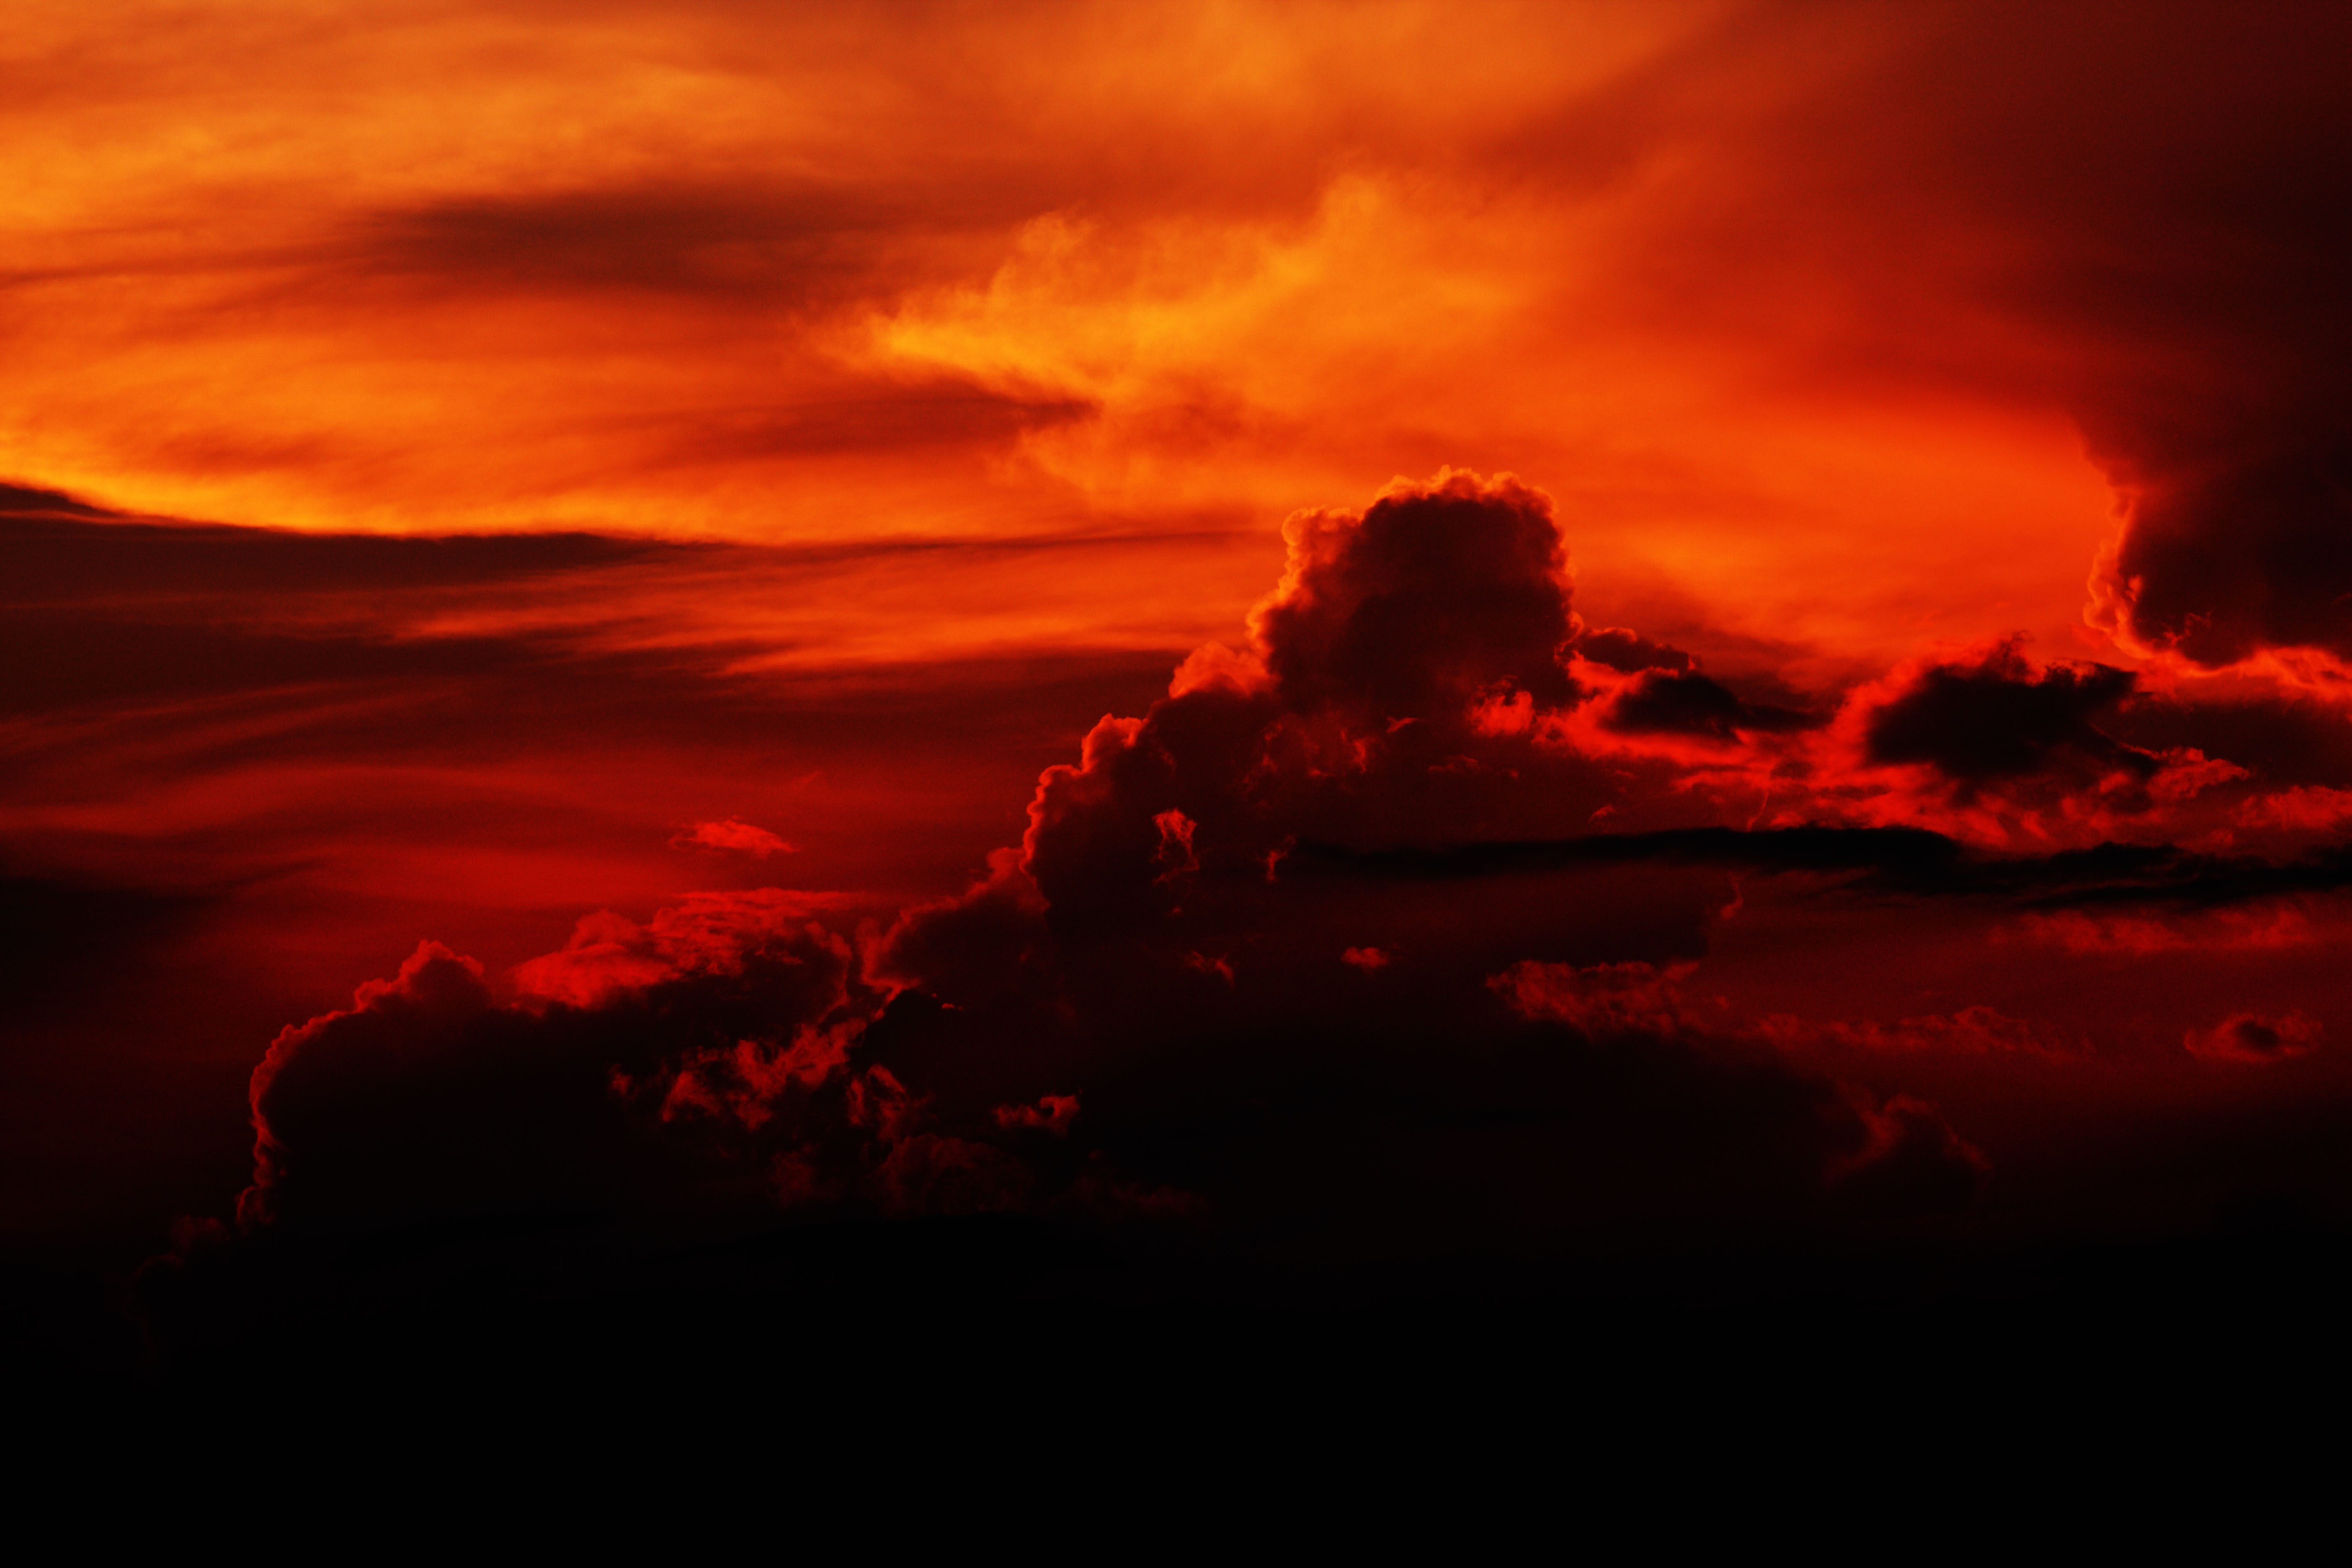 photo,material,free,landscape,picture,stock photo,Creative Commons,The sunset clouds, cloud, At dark, I am crimson, Brightness